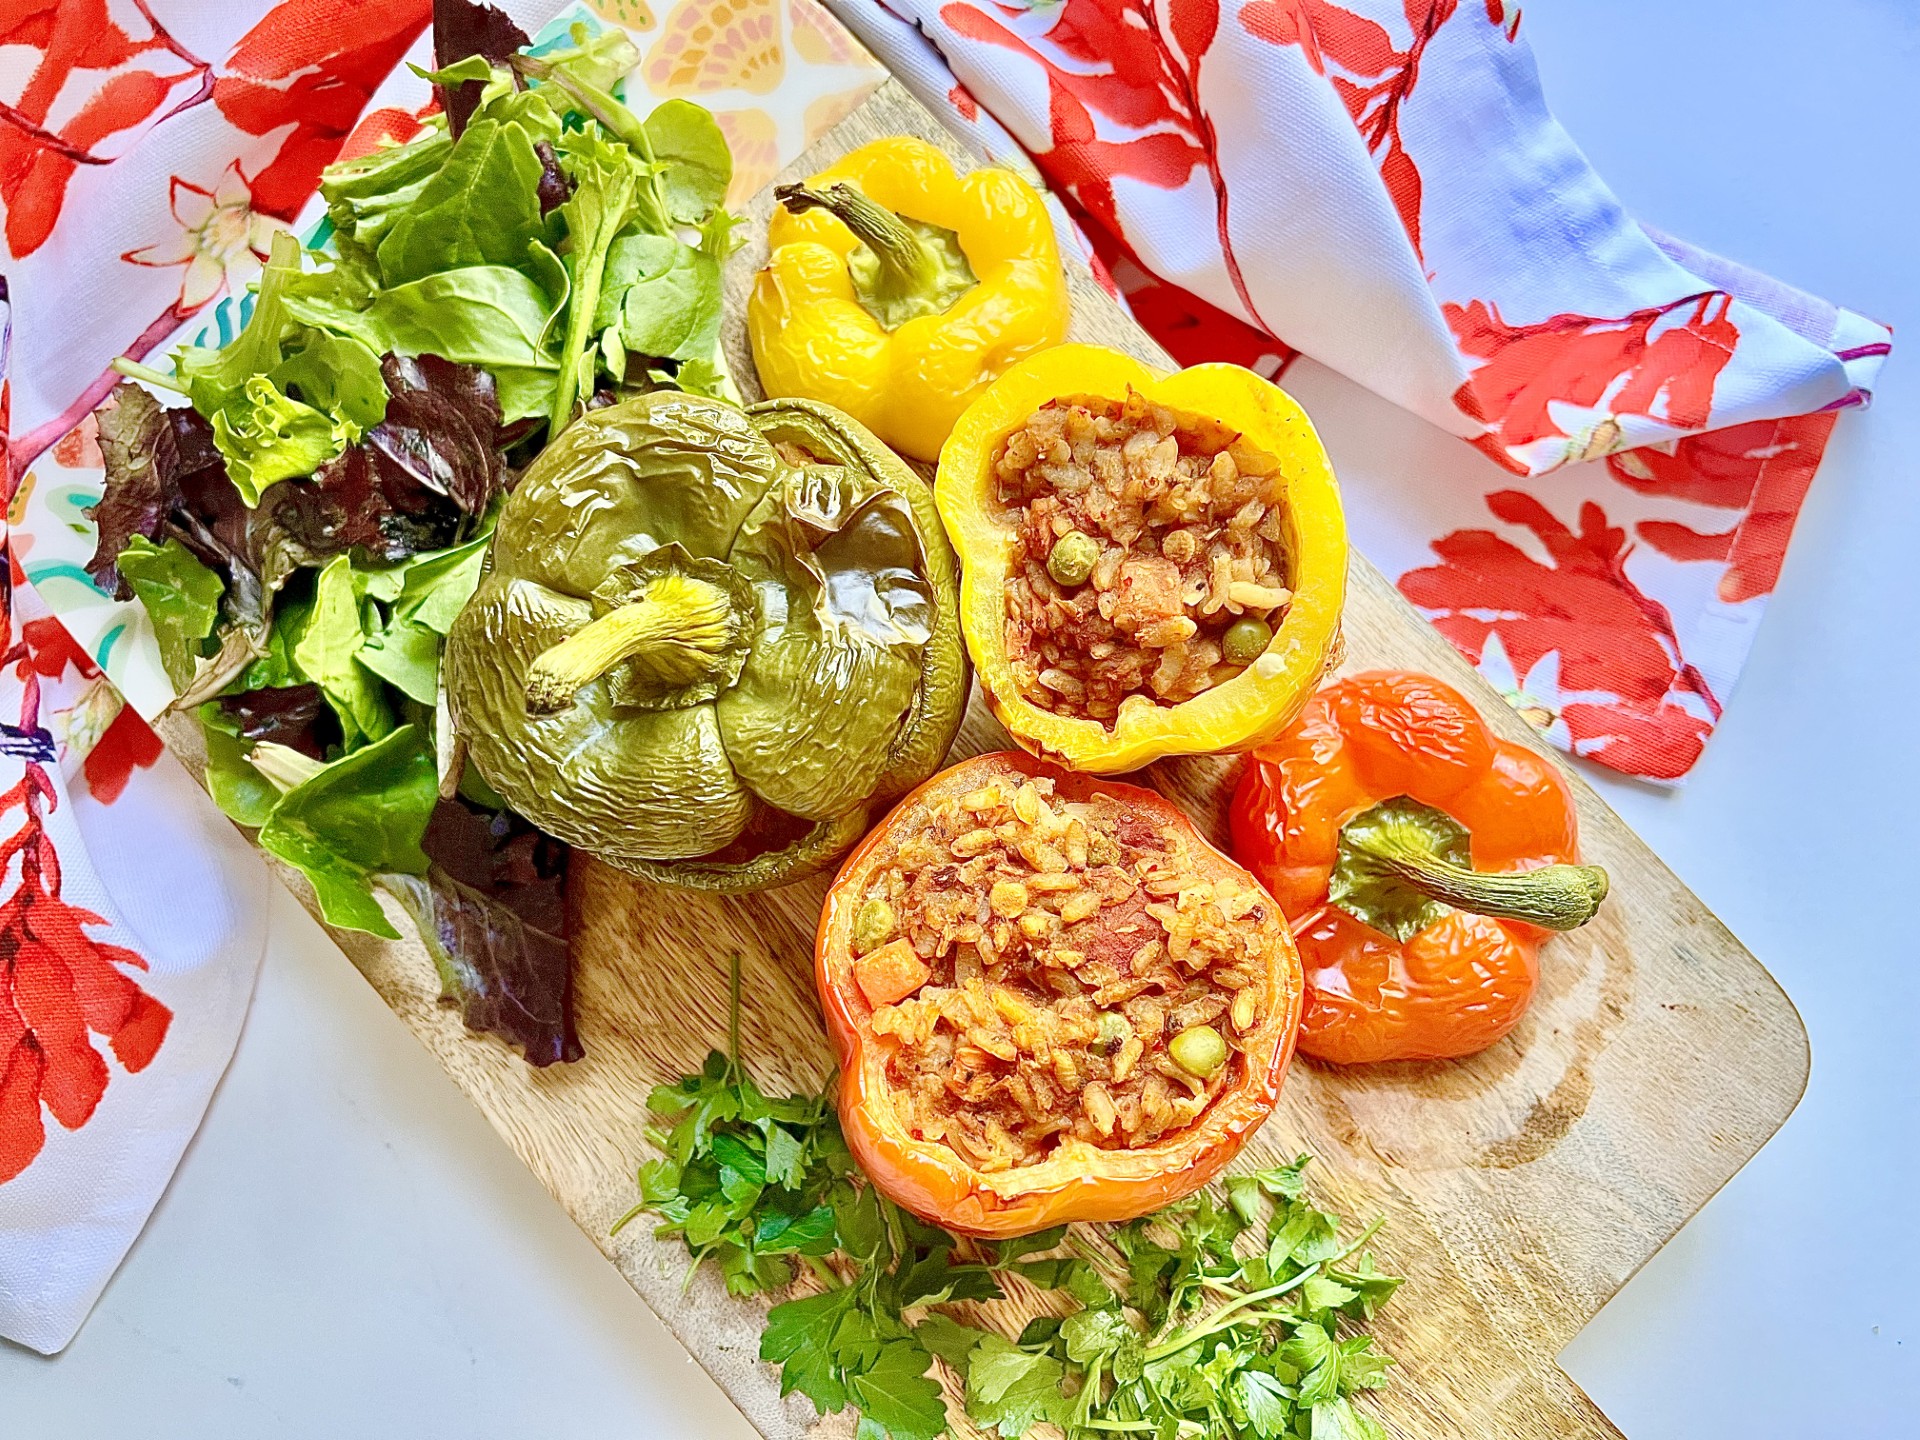 A wooden serving platter with one red pearl barley and lentil stuffed pepper and one yellow pearl barley and lentil stuffed pepper and one green pearl barley and lentil stuffed pepper